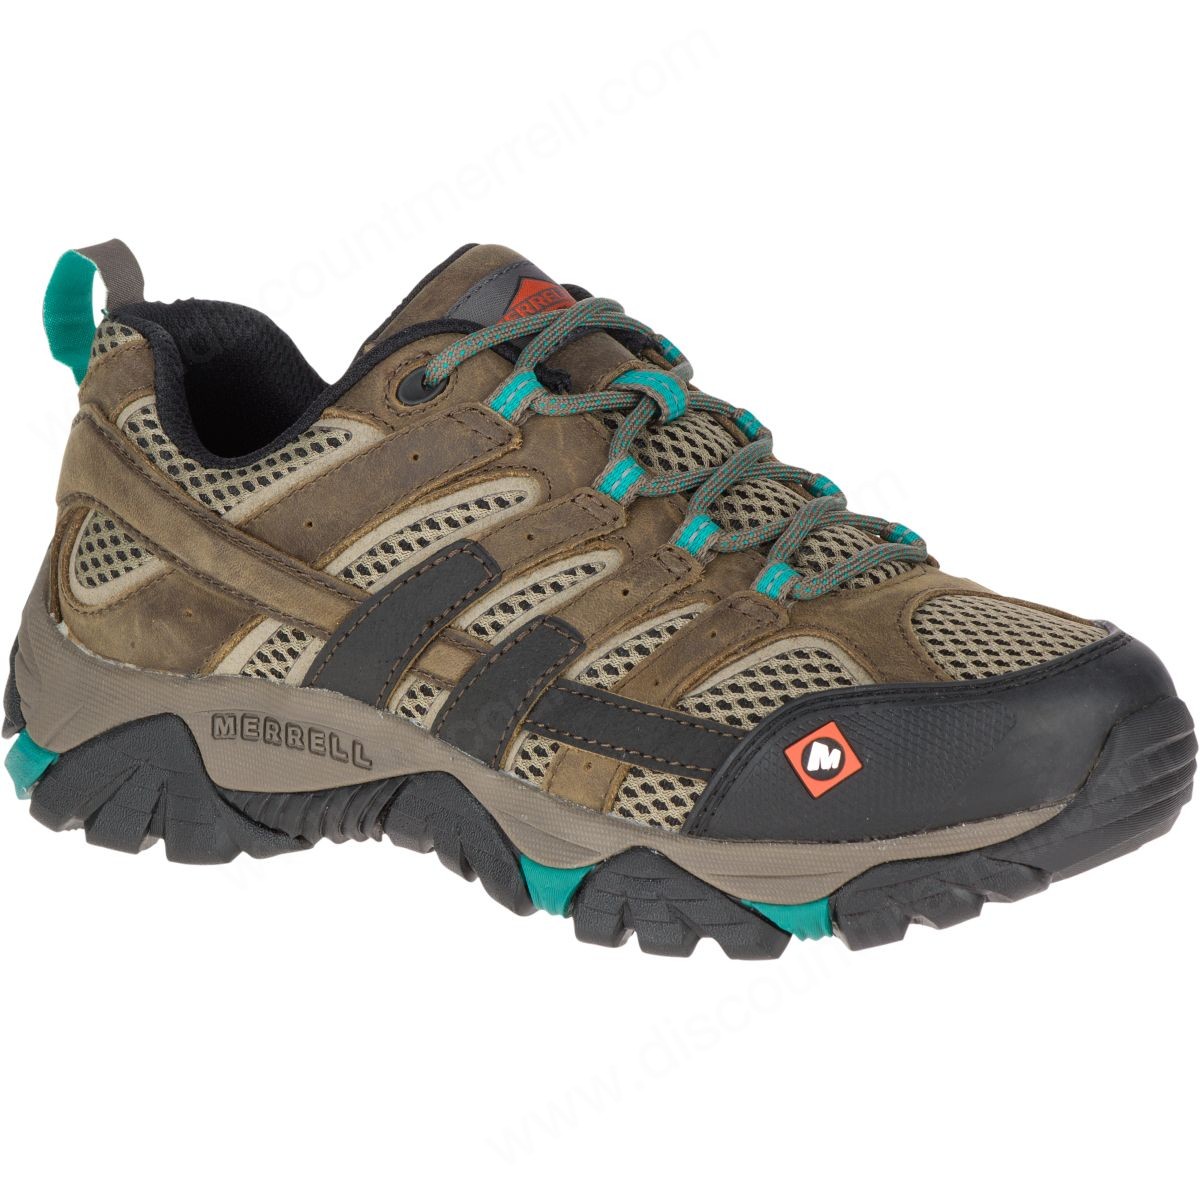 Merrell Lady's Moab Vapor Work Trainers Boulder - Merrell Lady's Moab Vapor Work Trainers Boulder